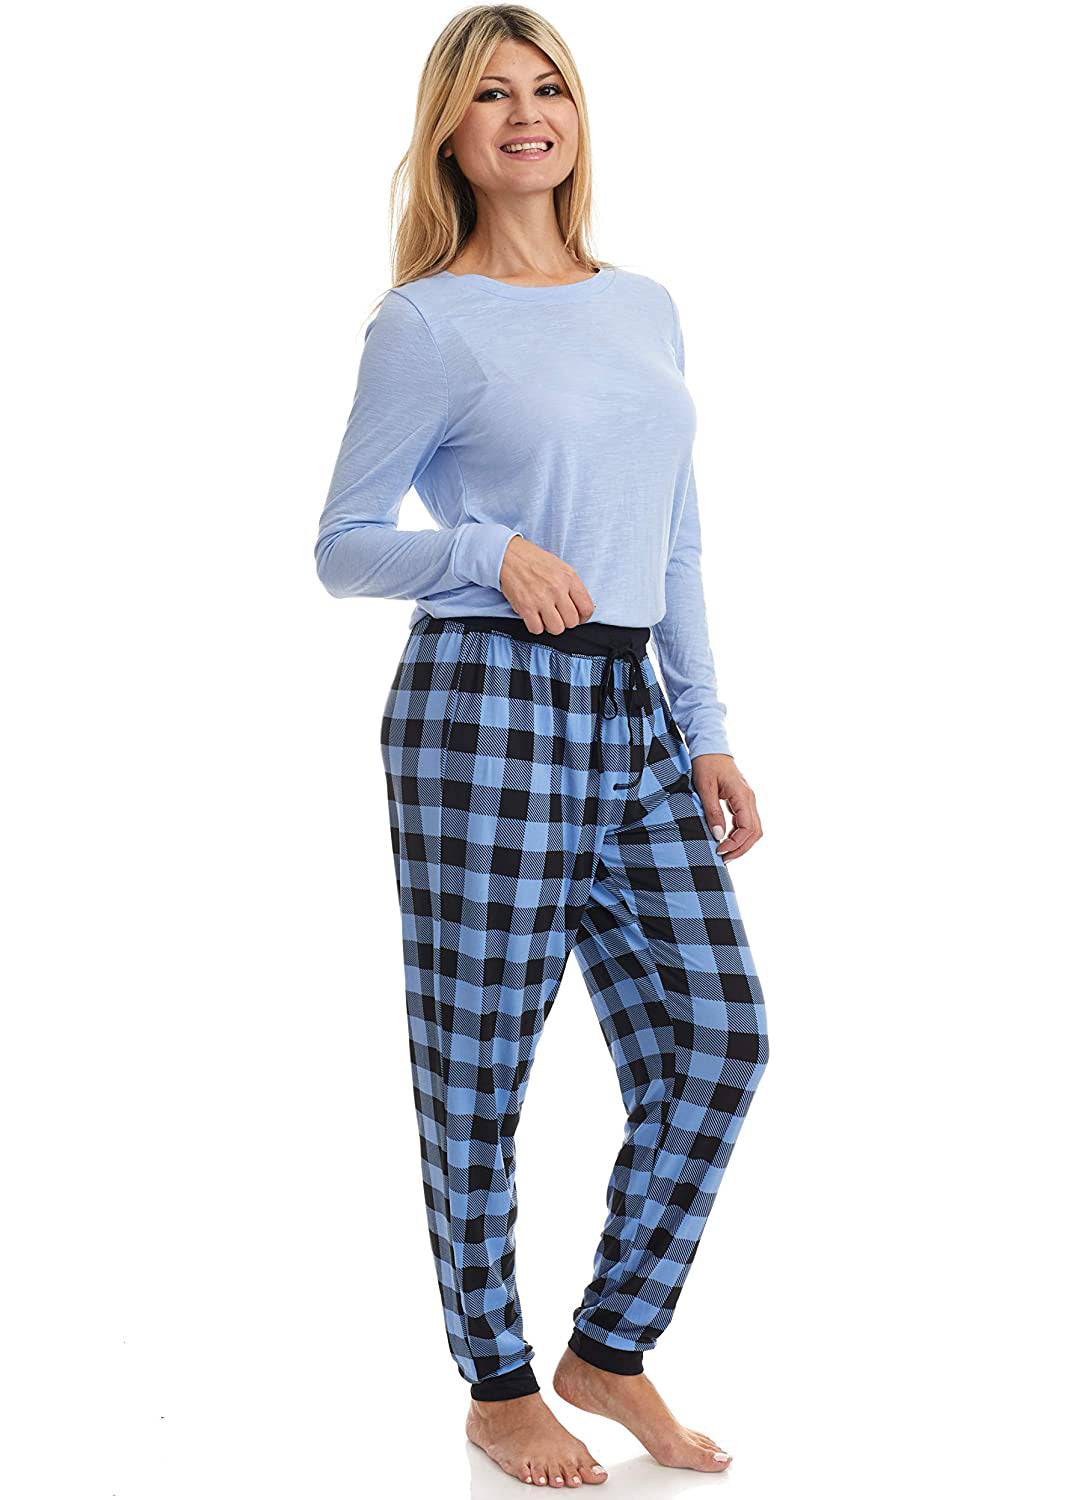 PJ joggers with soft velvety texture, stretch, elastic waistband, drawstring, and stylish ankle cuff. This pattern is plaid black and blue.